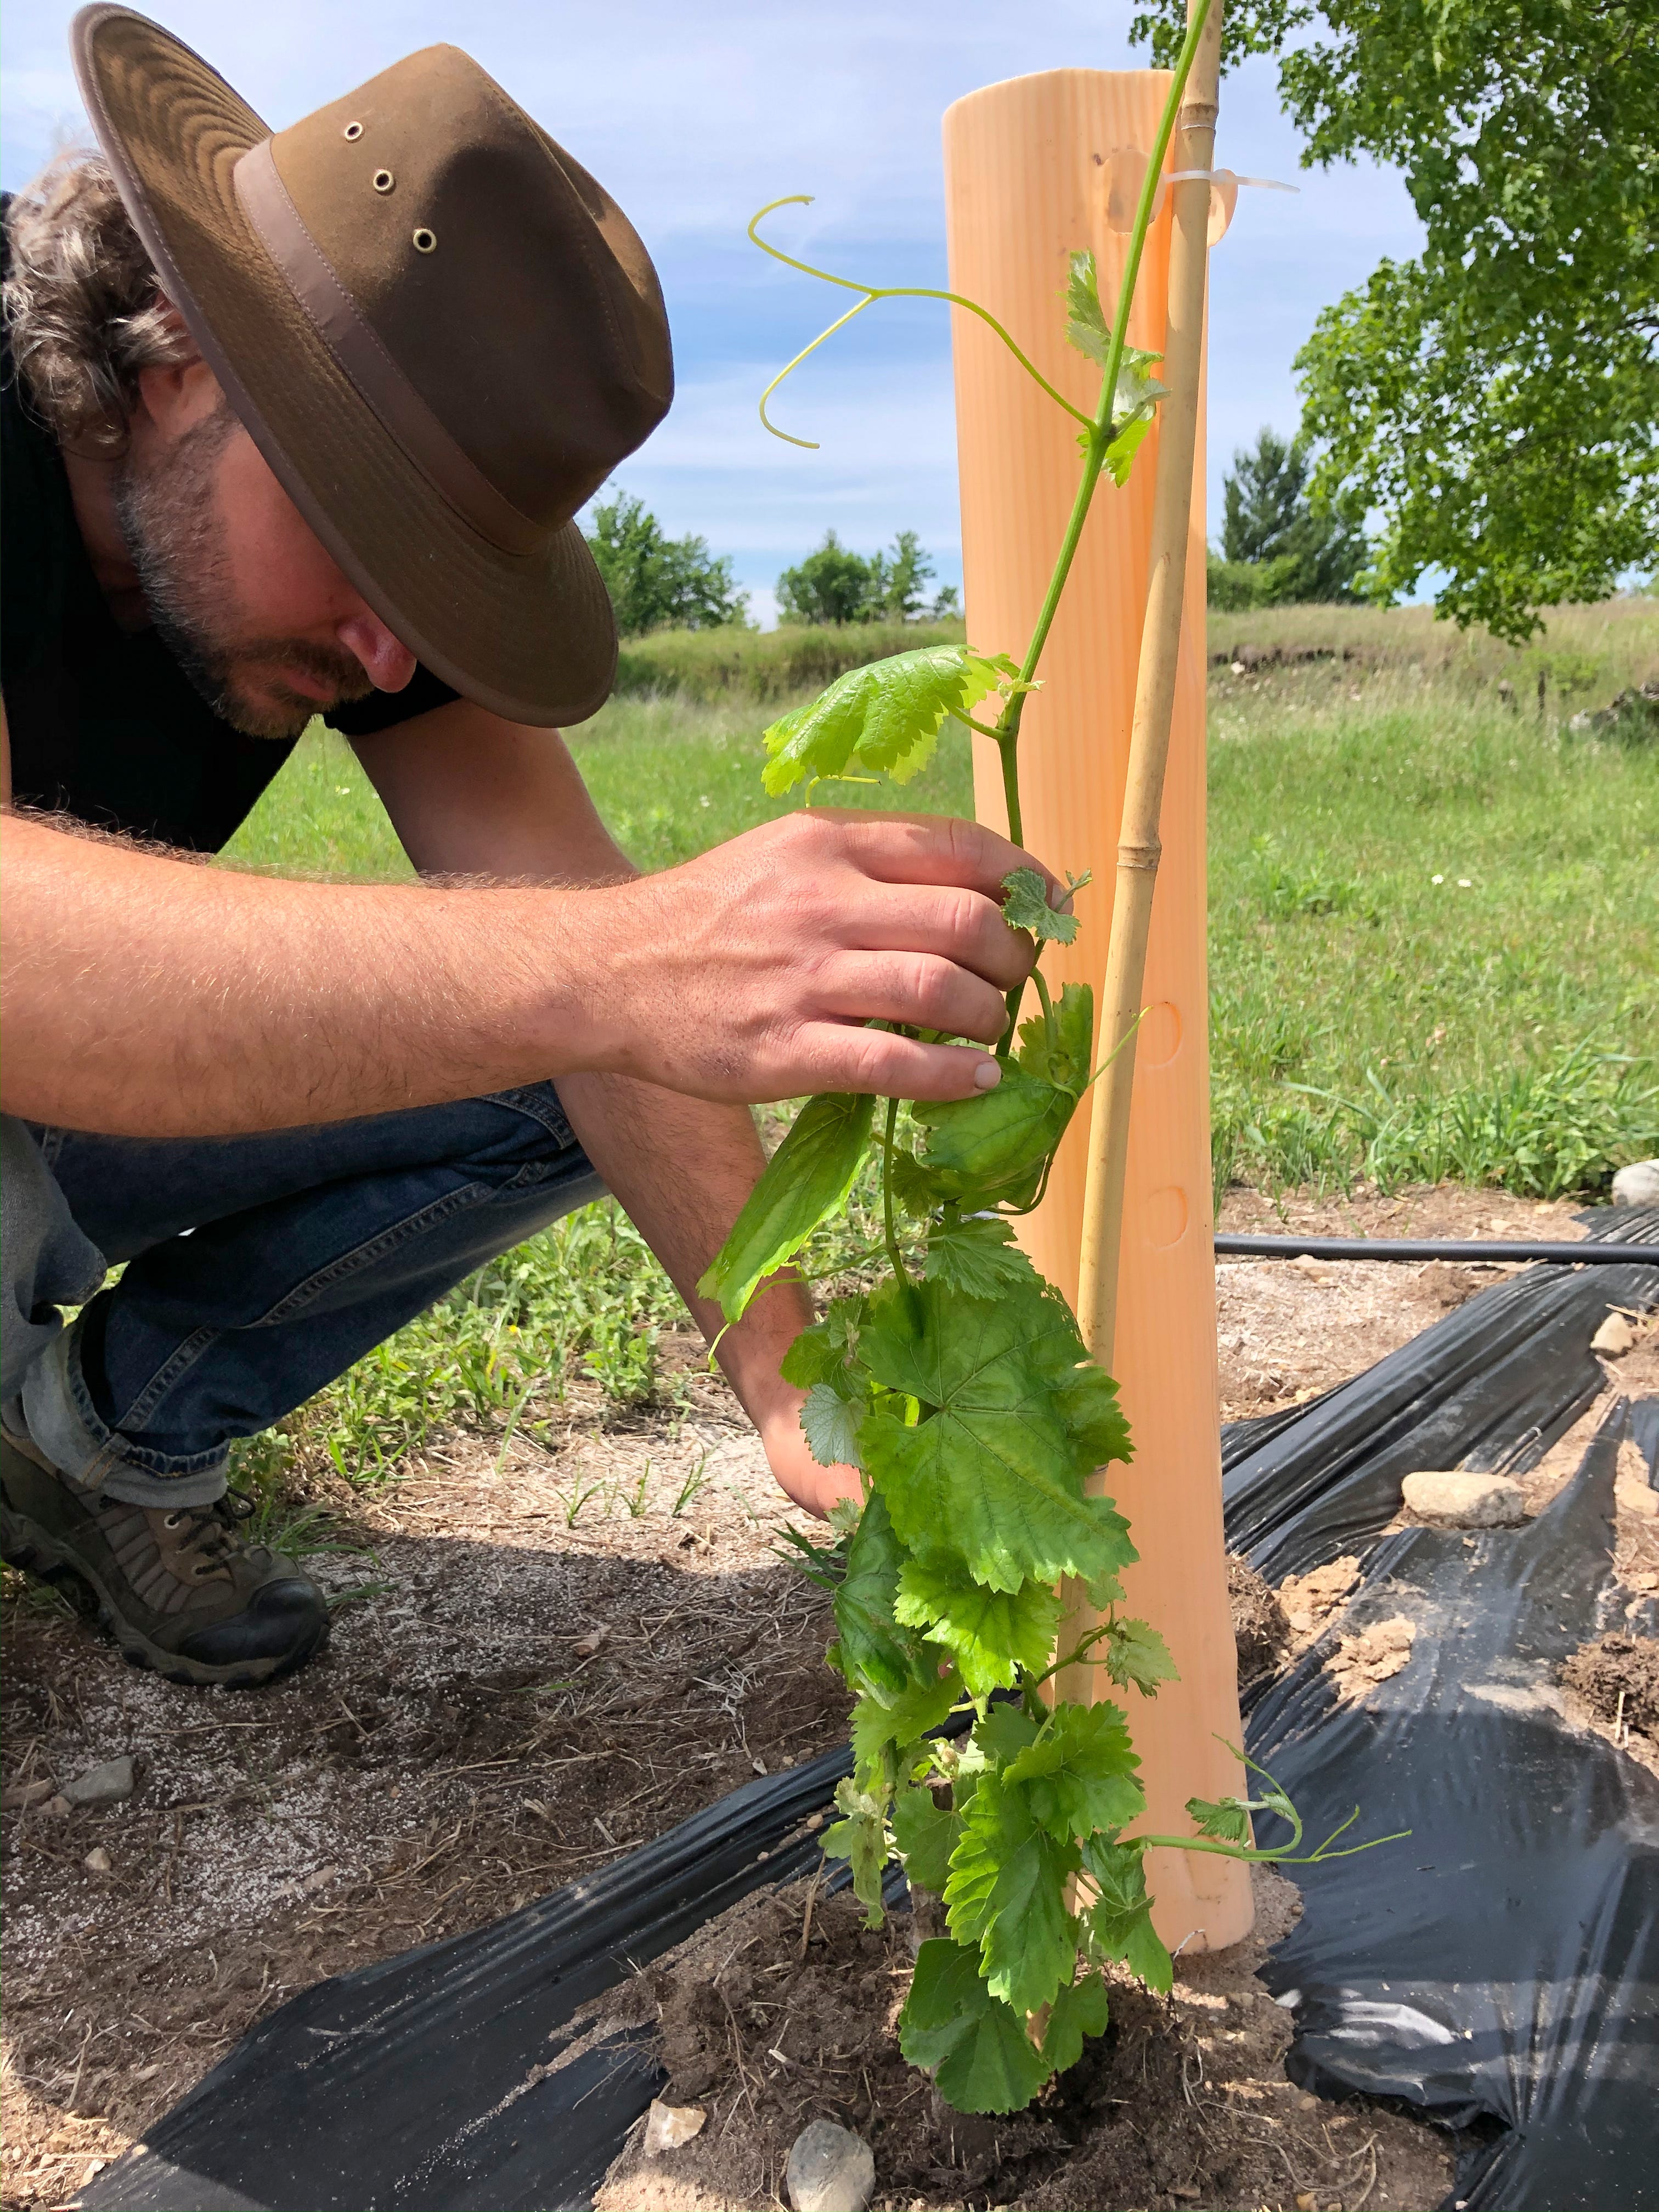 Adam Kendall checks the young vines for signs of pests or blooms that may turn into grapes. The couple is following organic farming and pest management practices and plans to remove the inflorescence (early fruit) for several years to allow the vines to mature.